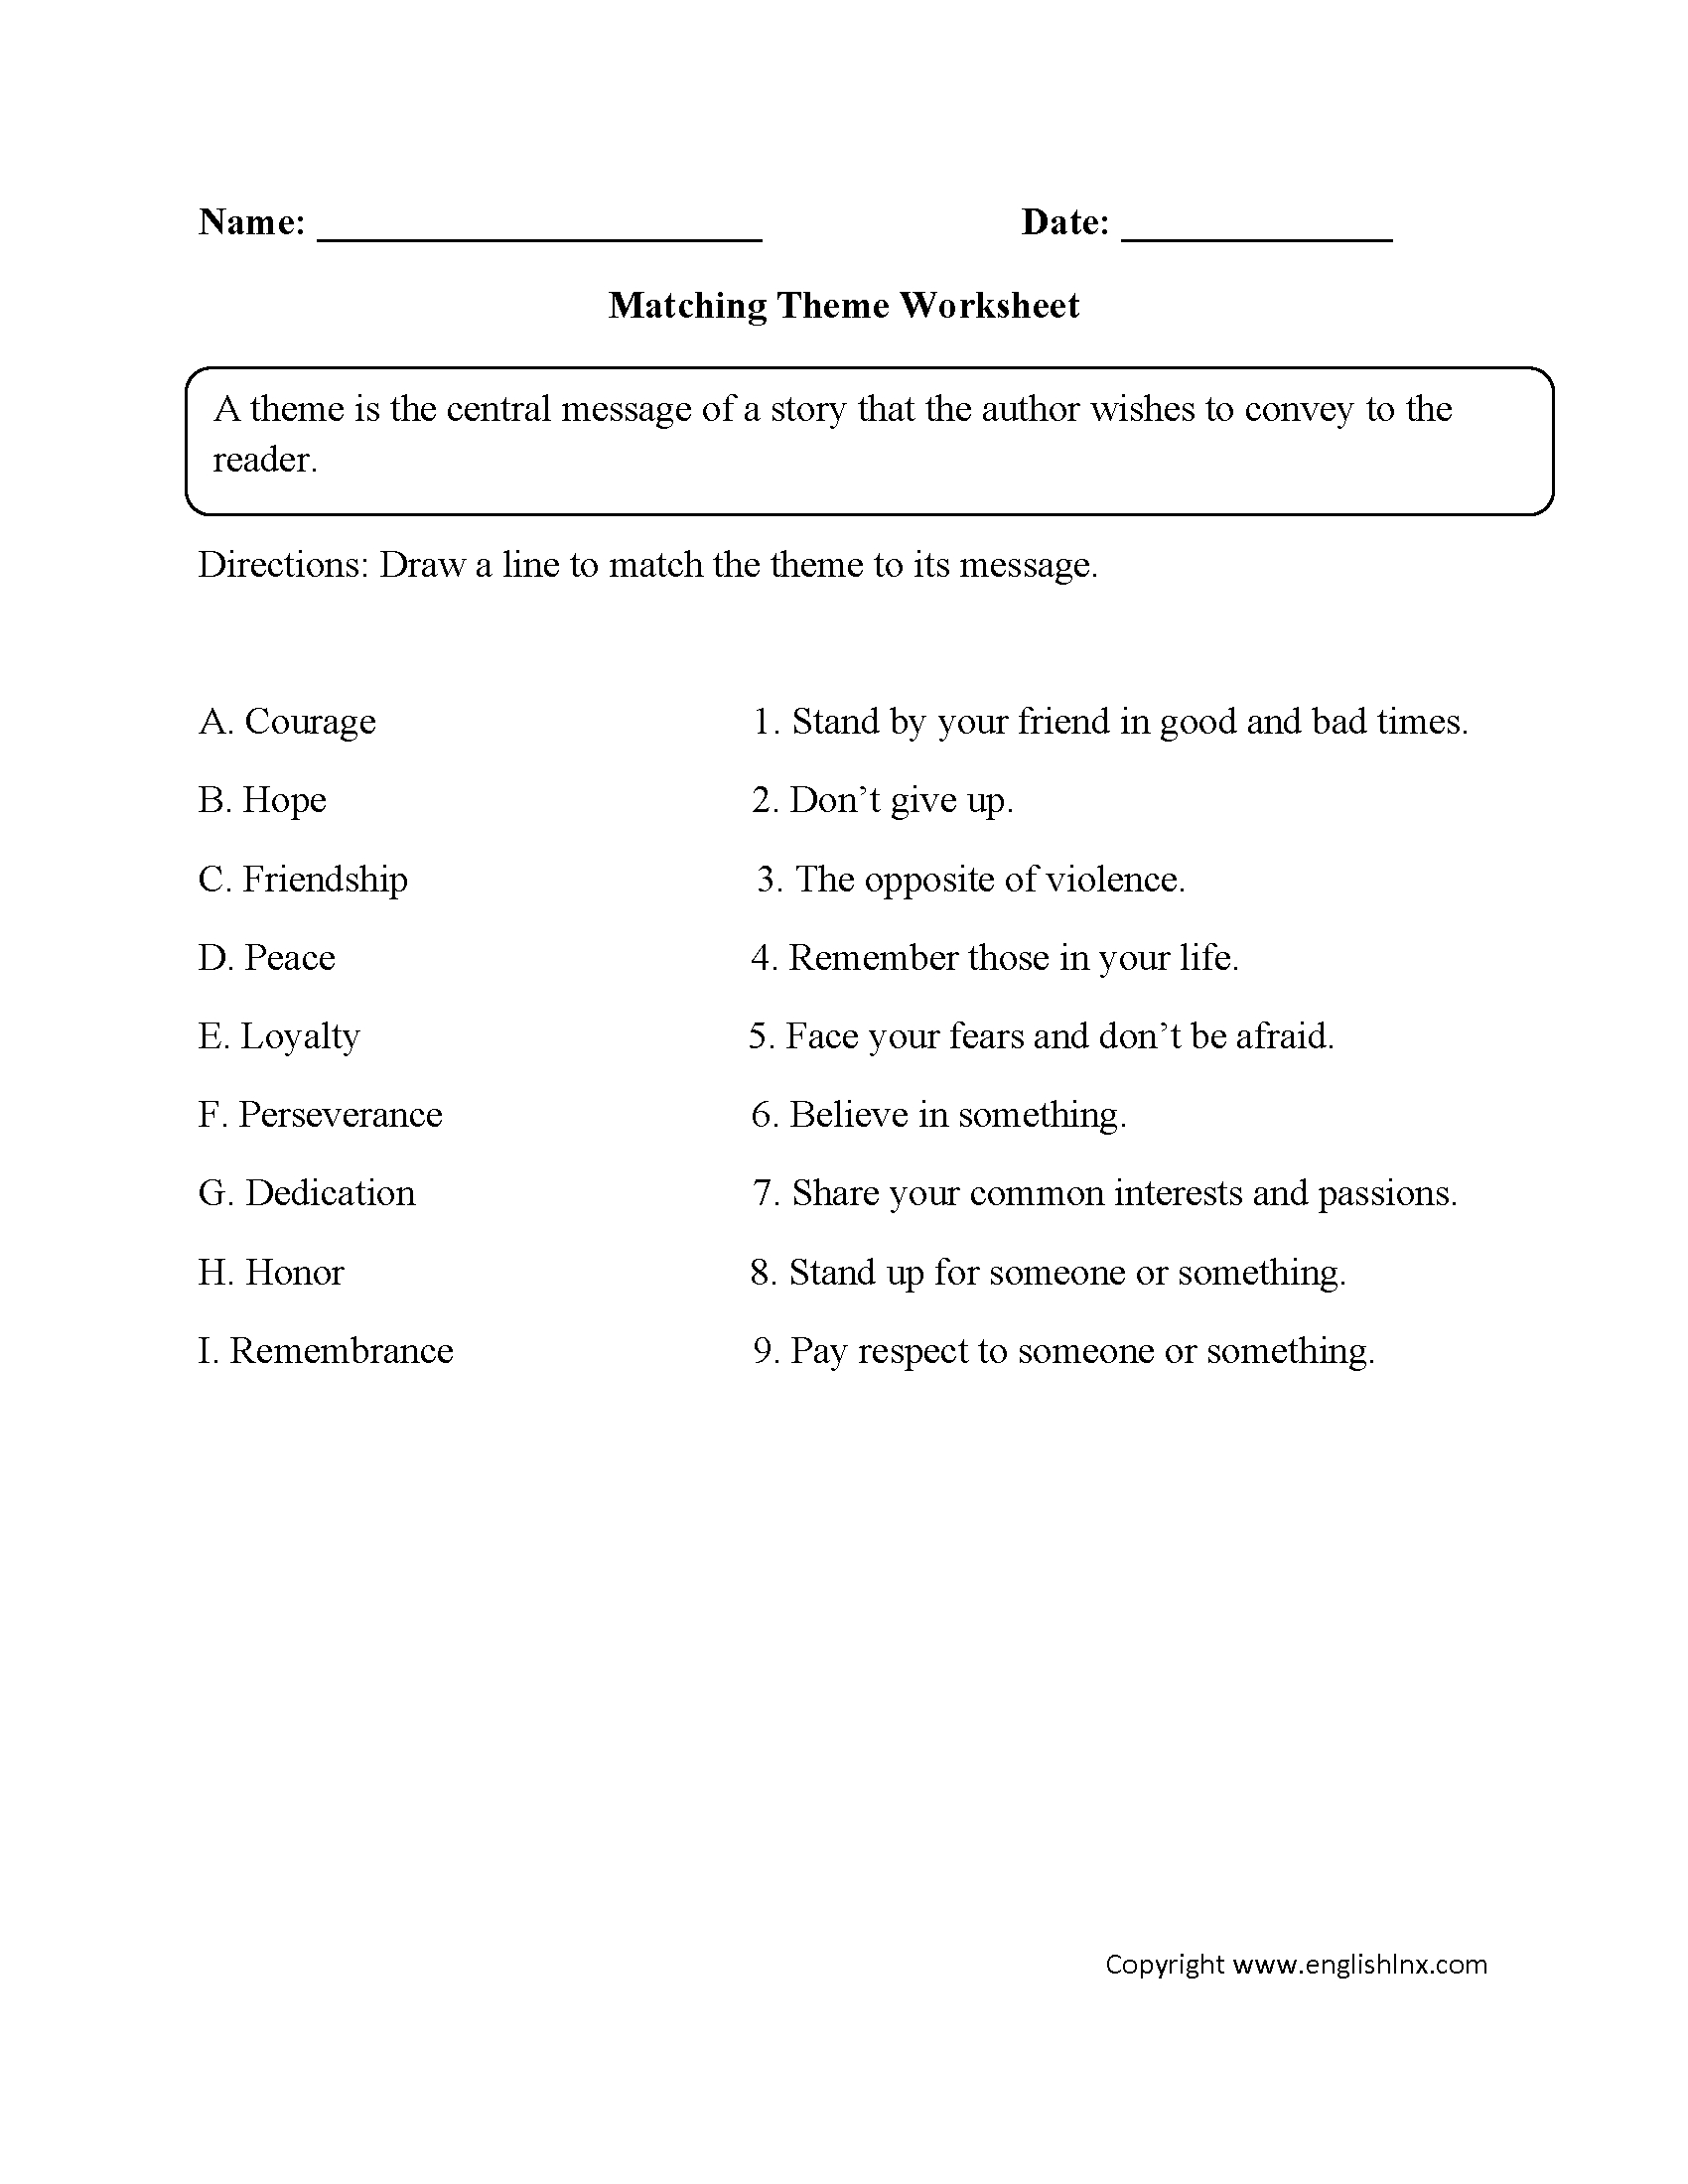 theme-worksheets-4th-grade-db-excel